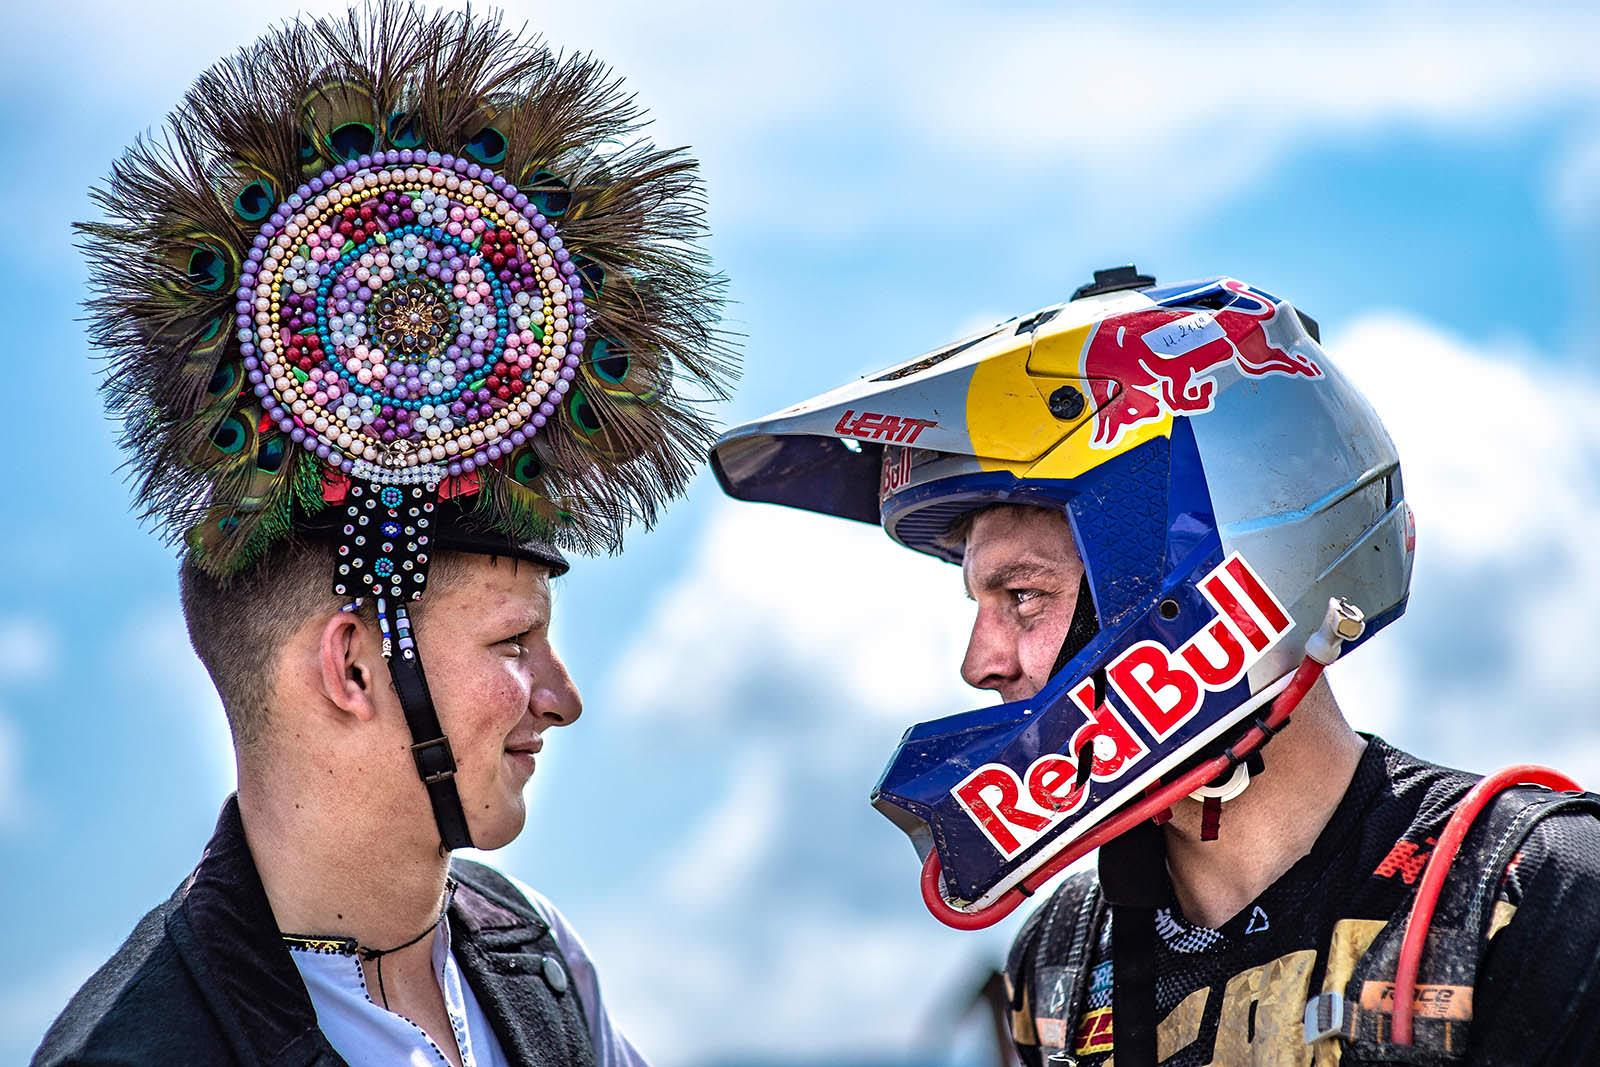 Jonny Walker of Great Britain is seen during the second race day at the World Enduro Super Series 2019 Stop 5 - Red Bull Romaniacs in Sibiu, Romania on August 1st, 2019. // Mihai Stetcu / Red Bull Content Pool // SI201908011142 // Usage for editorial use only //